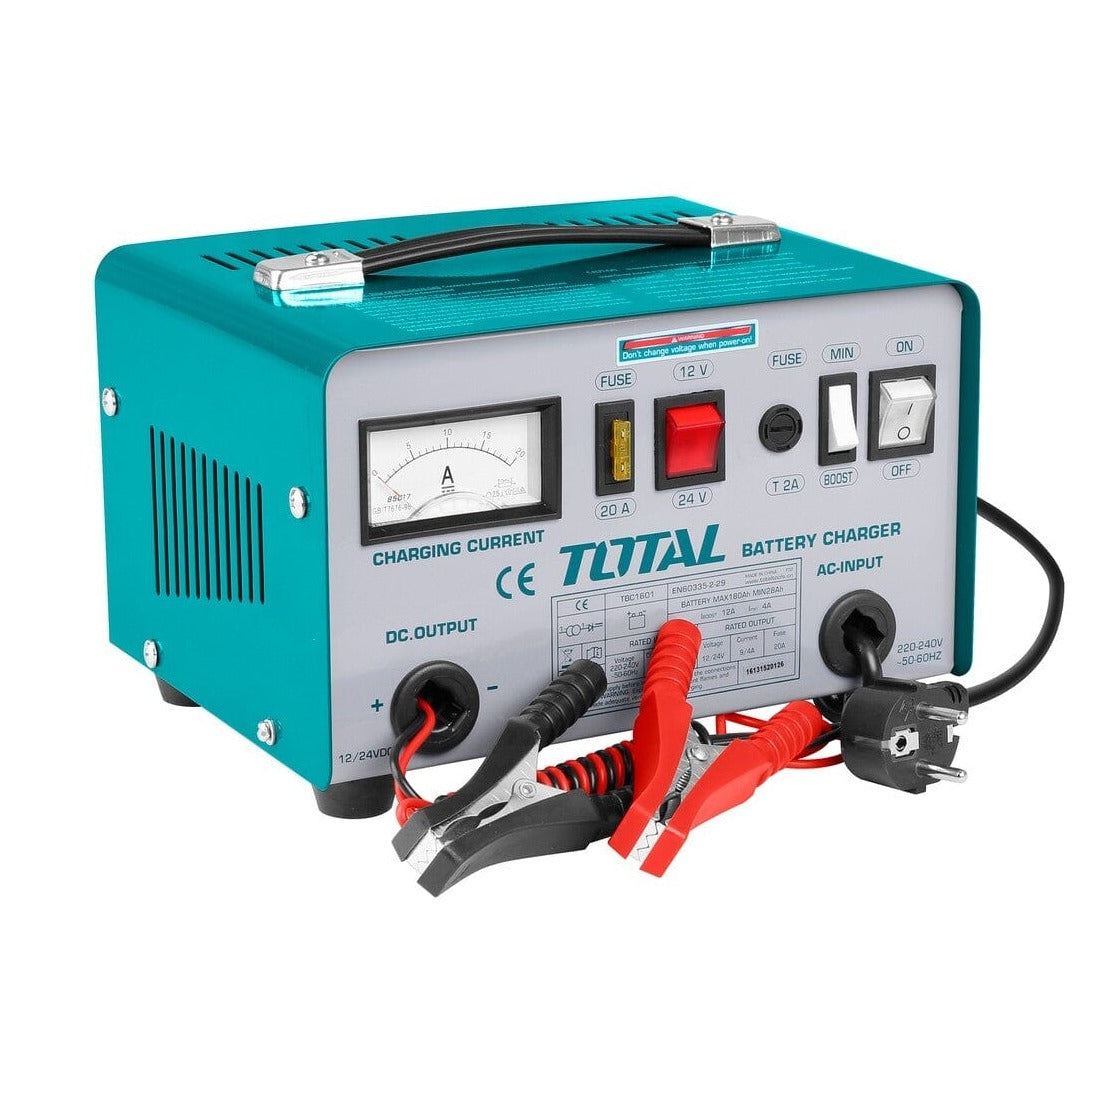 Stay charged and ready on the go with the Total Portable Battery Charger 12/24V (TBC1601) at SupplyMaster.store in Ghana. Welding Machine & Accessories Buy Tools hardware Building materials